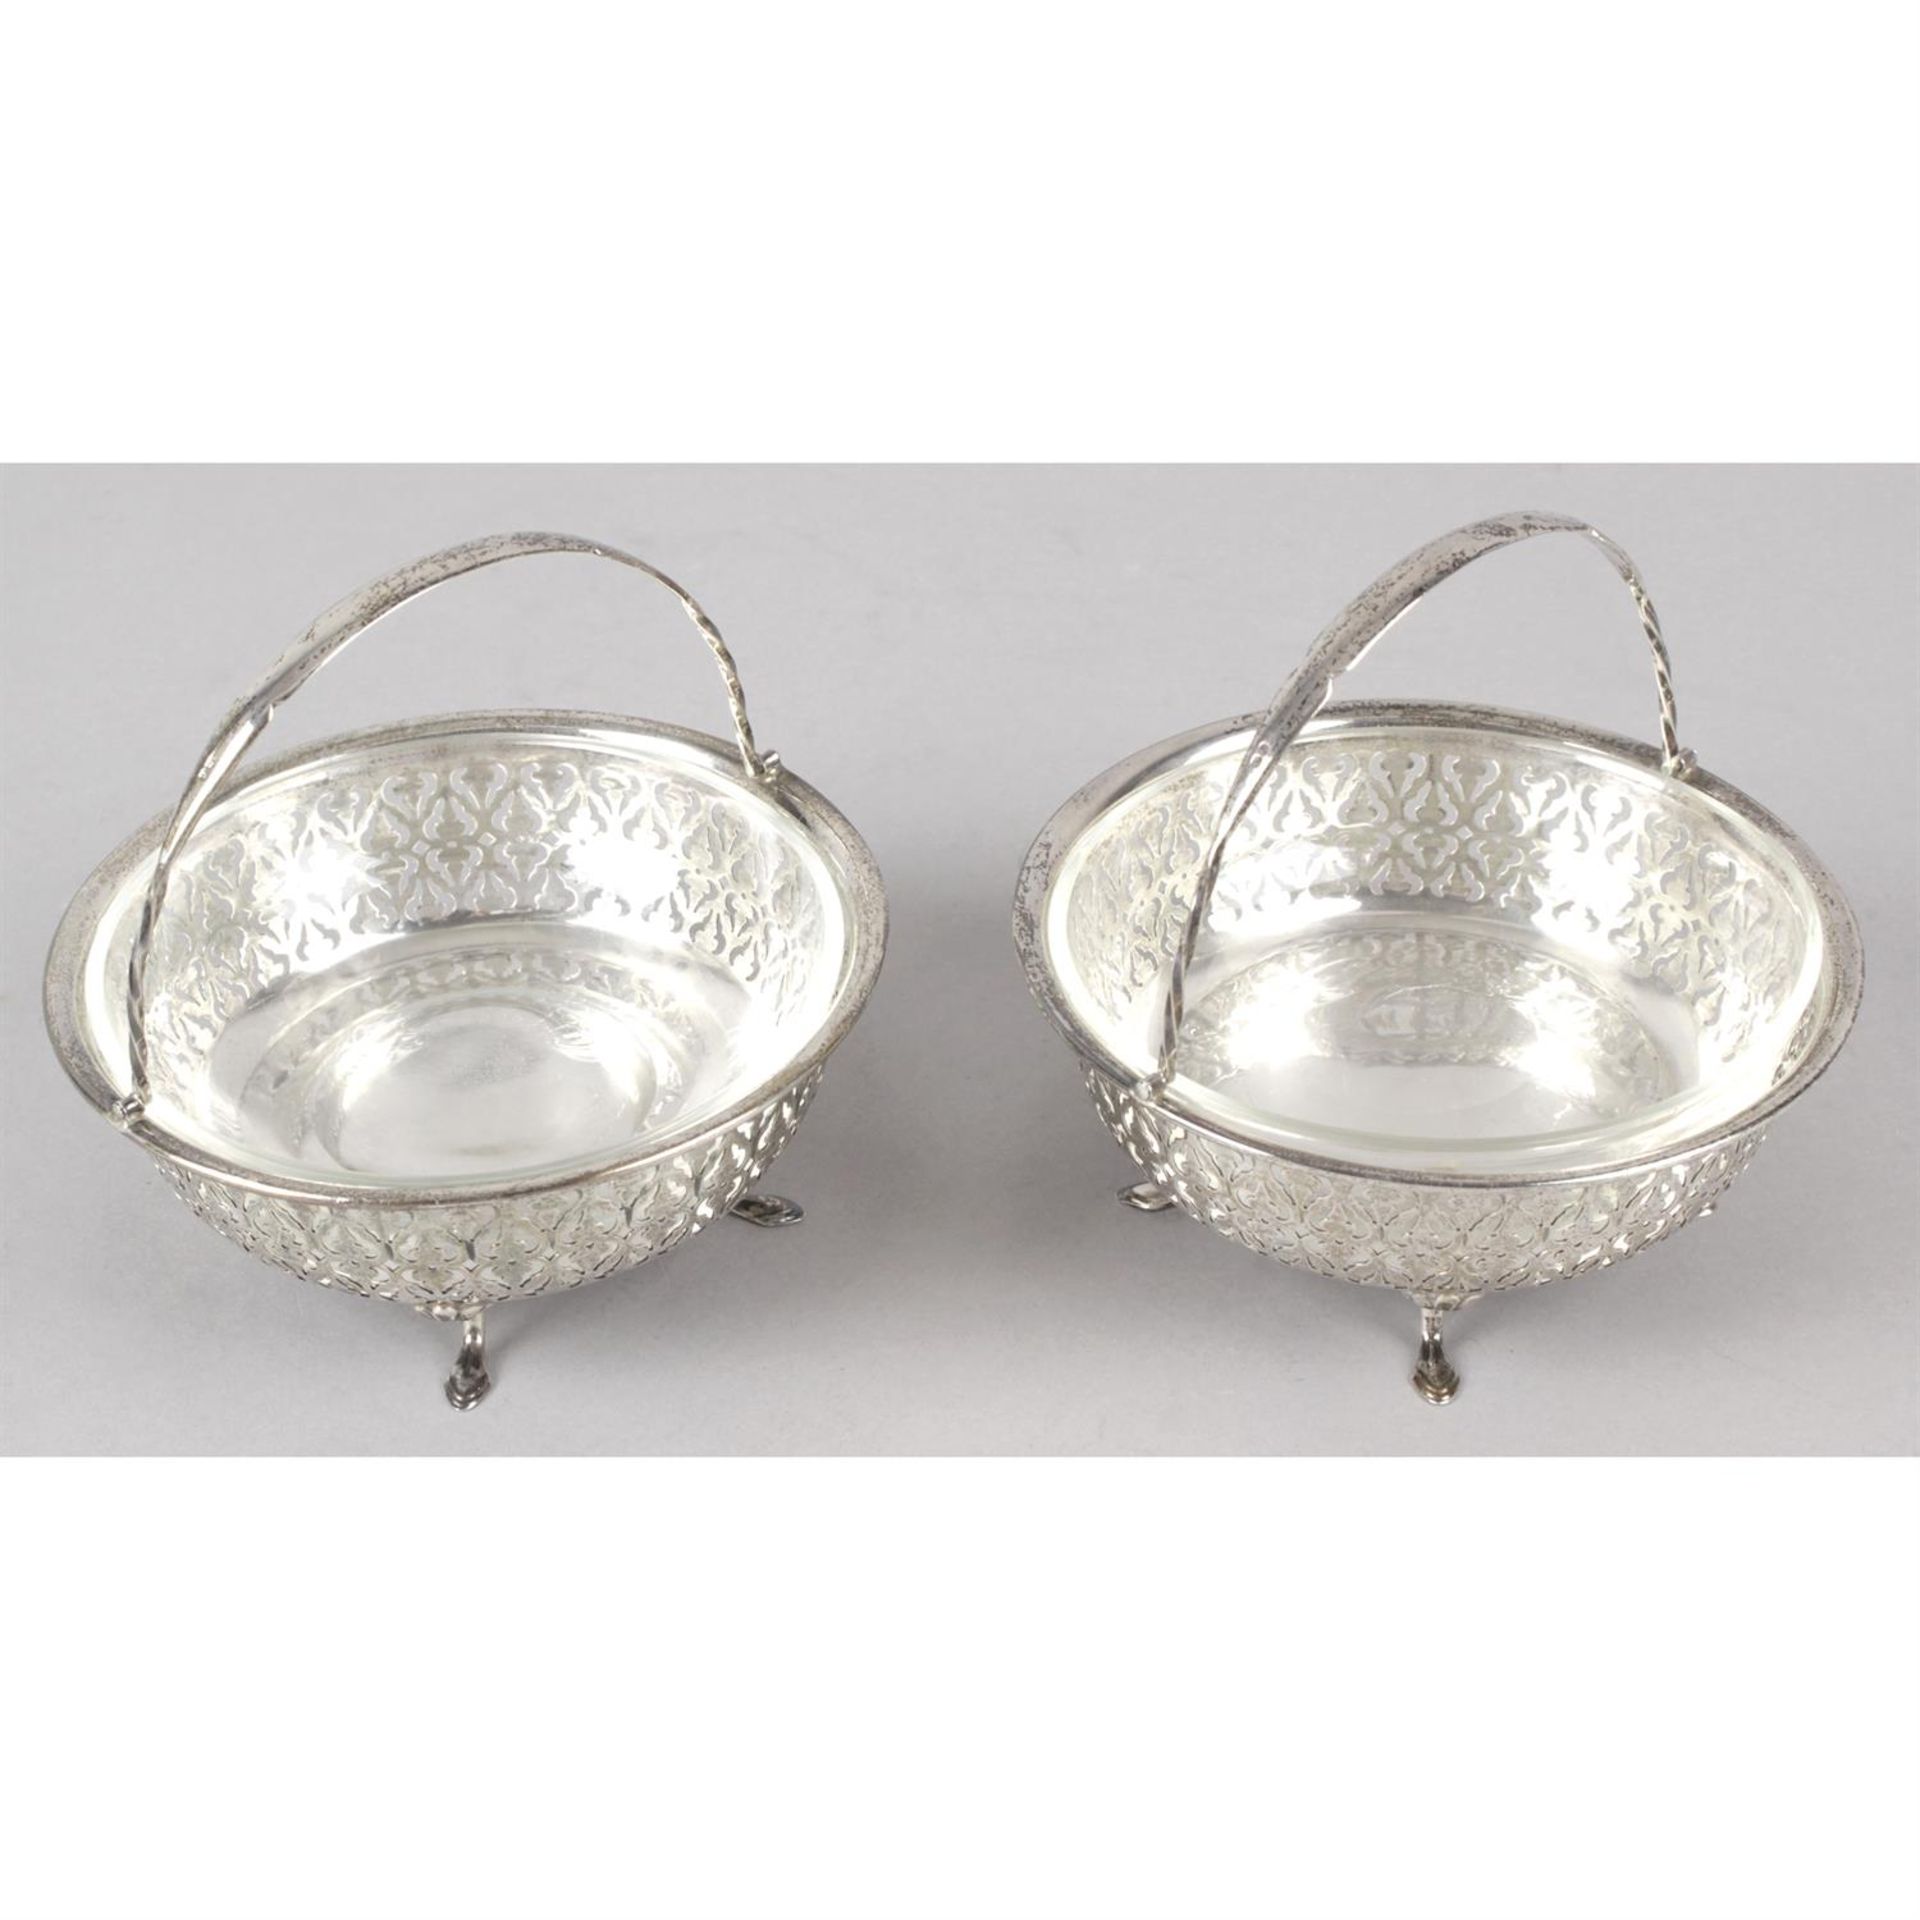 A pair of George V silver pierced swing-handle dishes with glass liners.